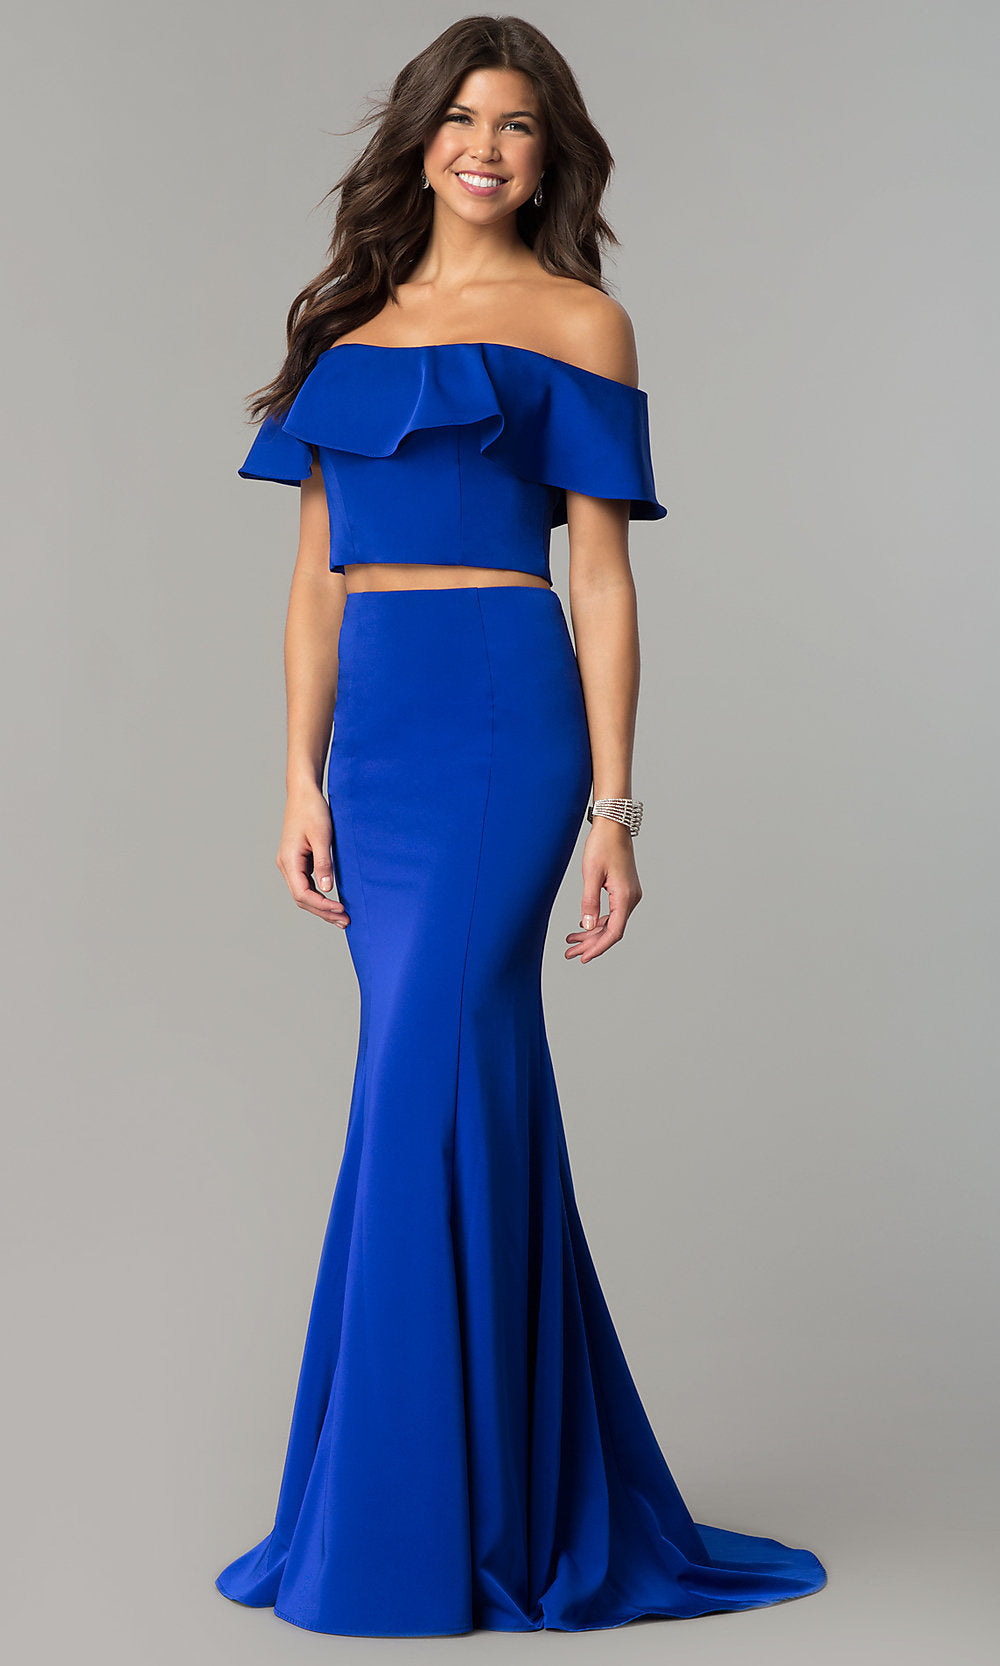 Royal Long Two-Piece Ruffled Off-the-Shoulder Prom Dress